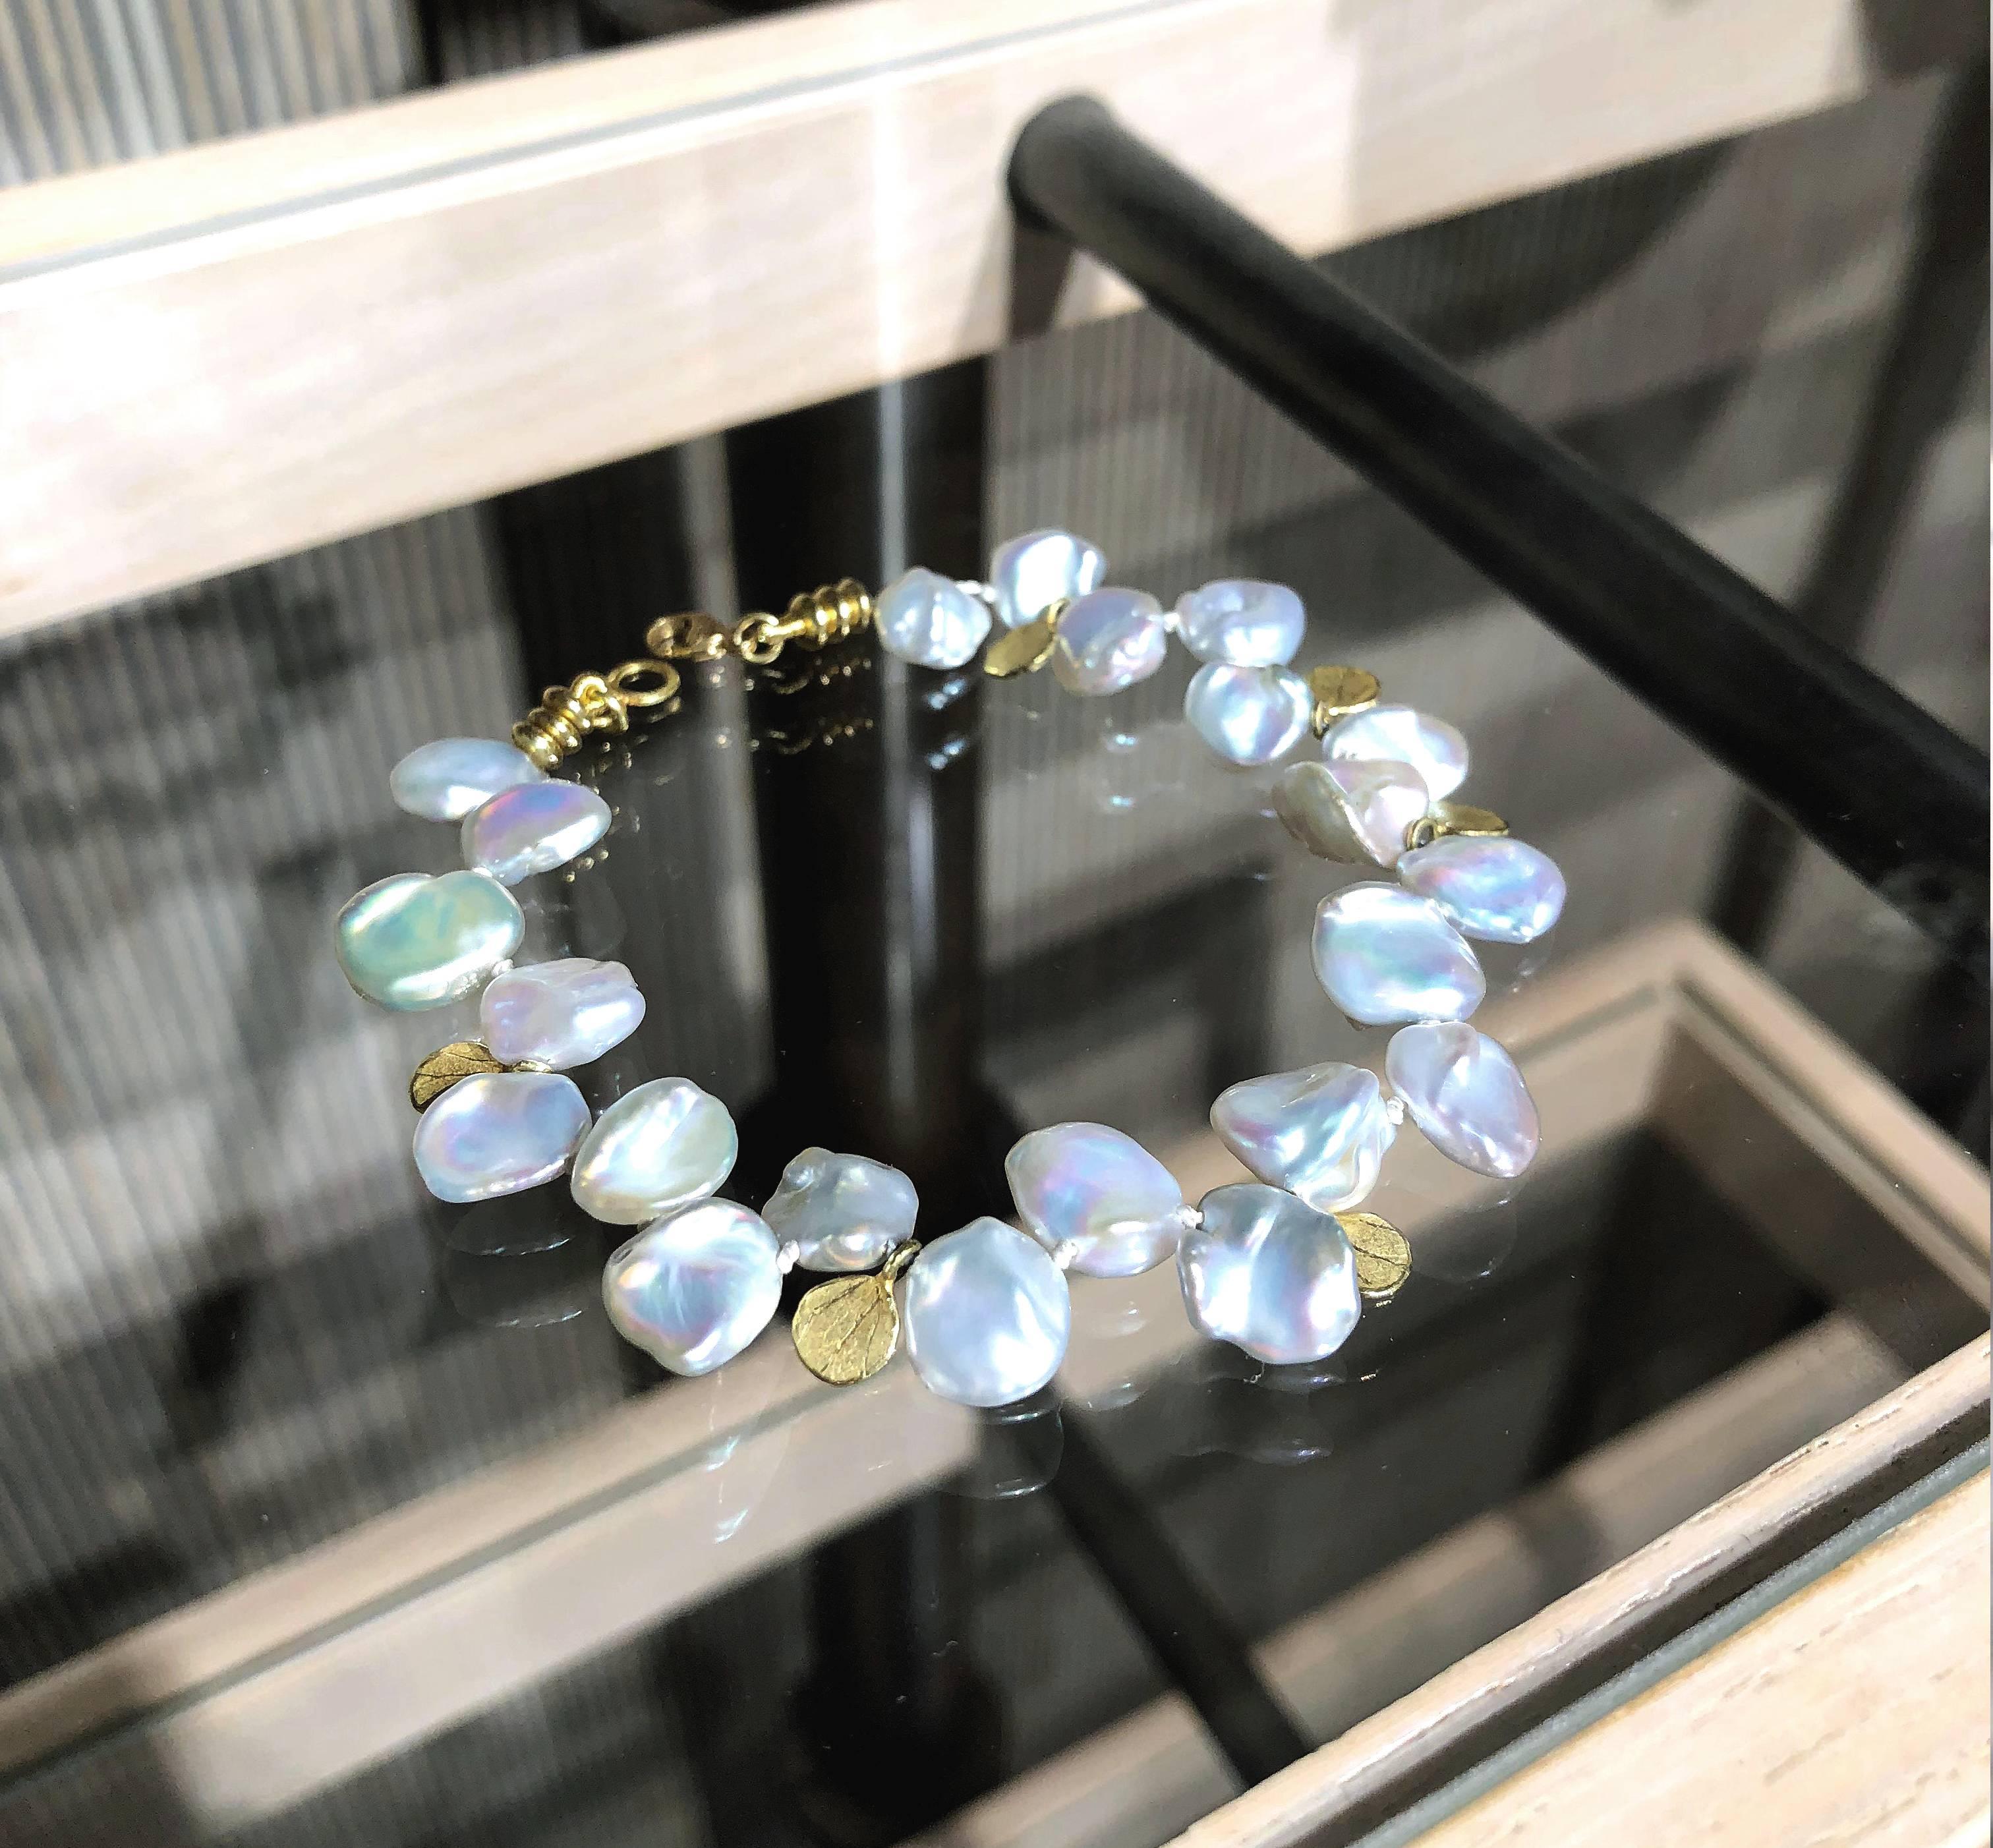 One of a Kind Bracelet handcrafted by award-winning jewelry artist Barbara Heinrich in 18k yellow gold featuring twenty-one lustrous silver blue keshi pearls accented with assorted 18k gold petal and bead charm elements. Stamped and hallmarked. 